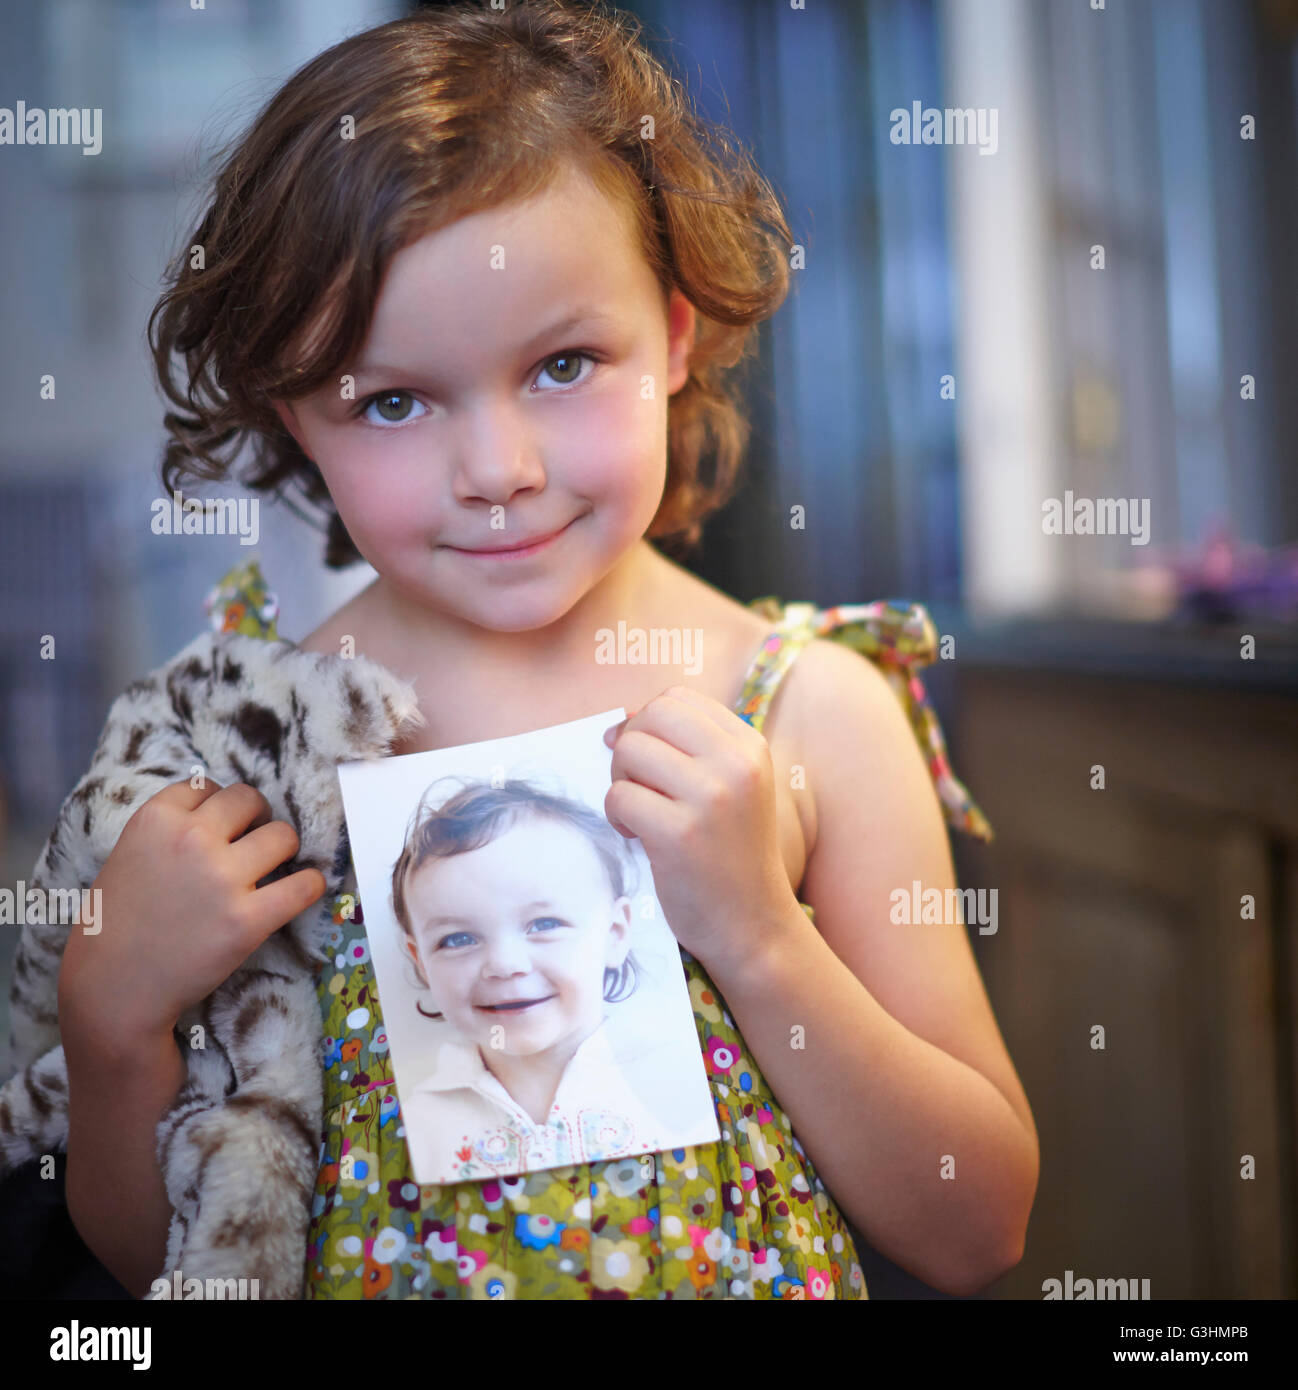 Portrait of girl holding photograph of herself Stock Photo